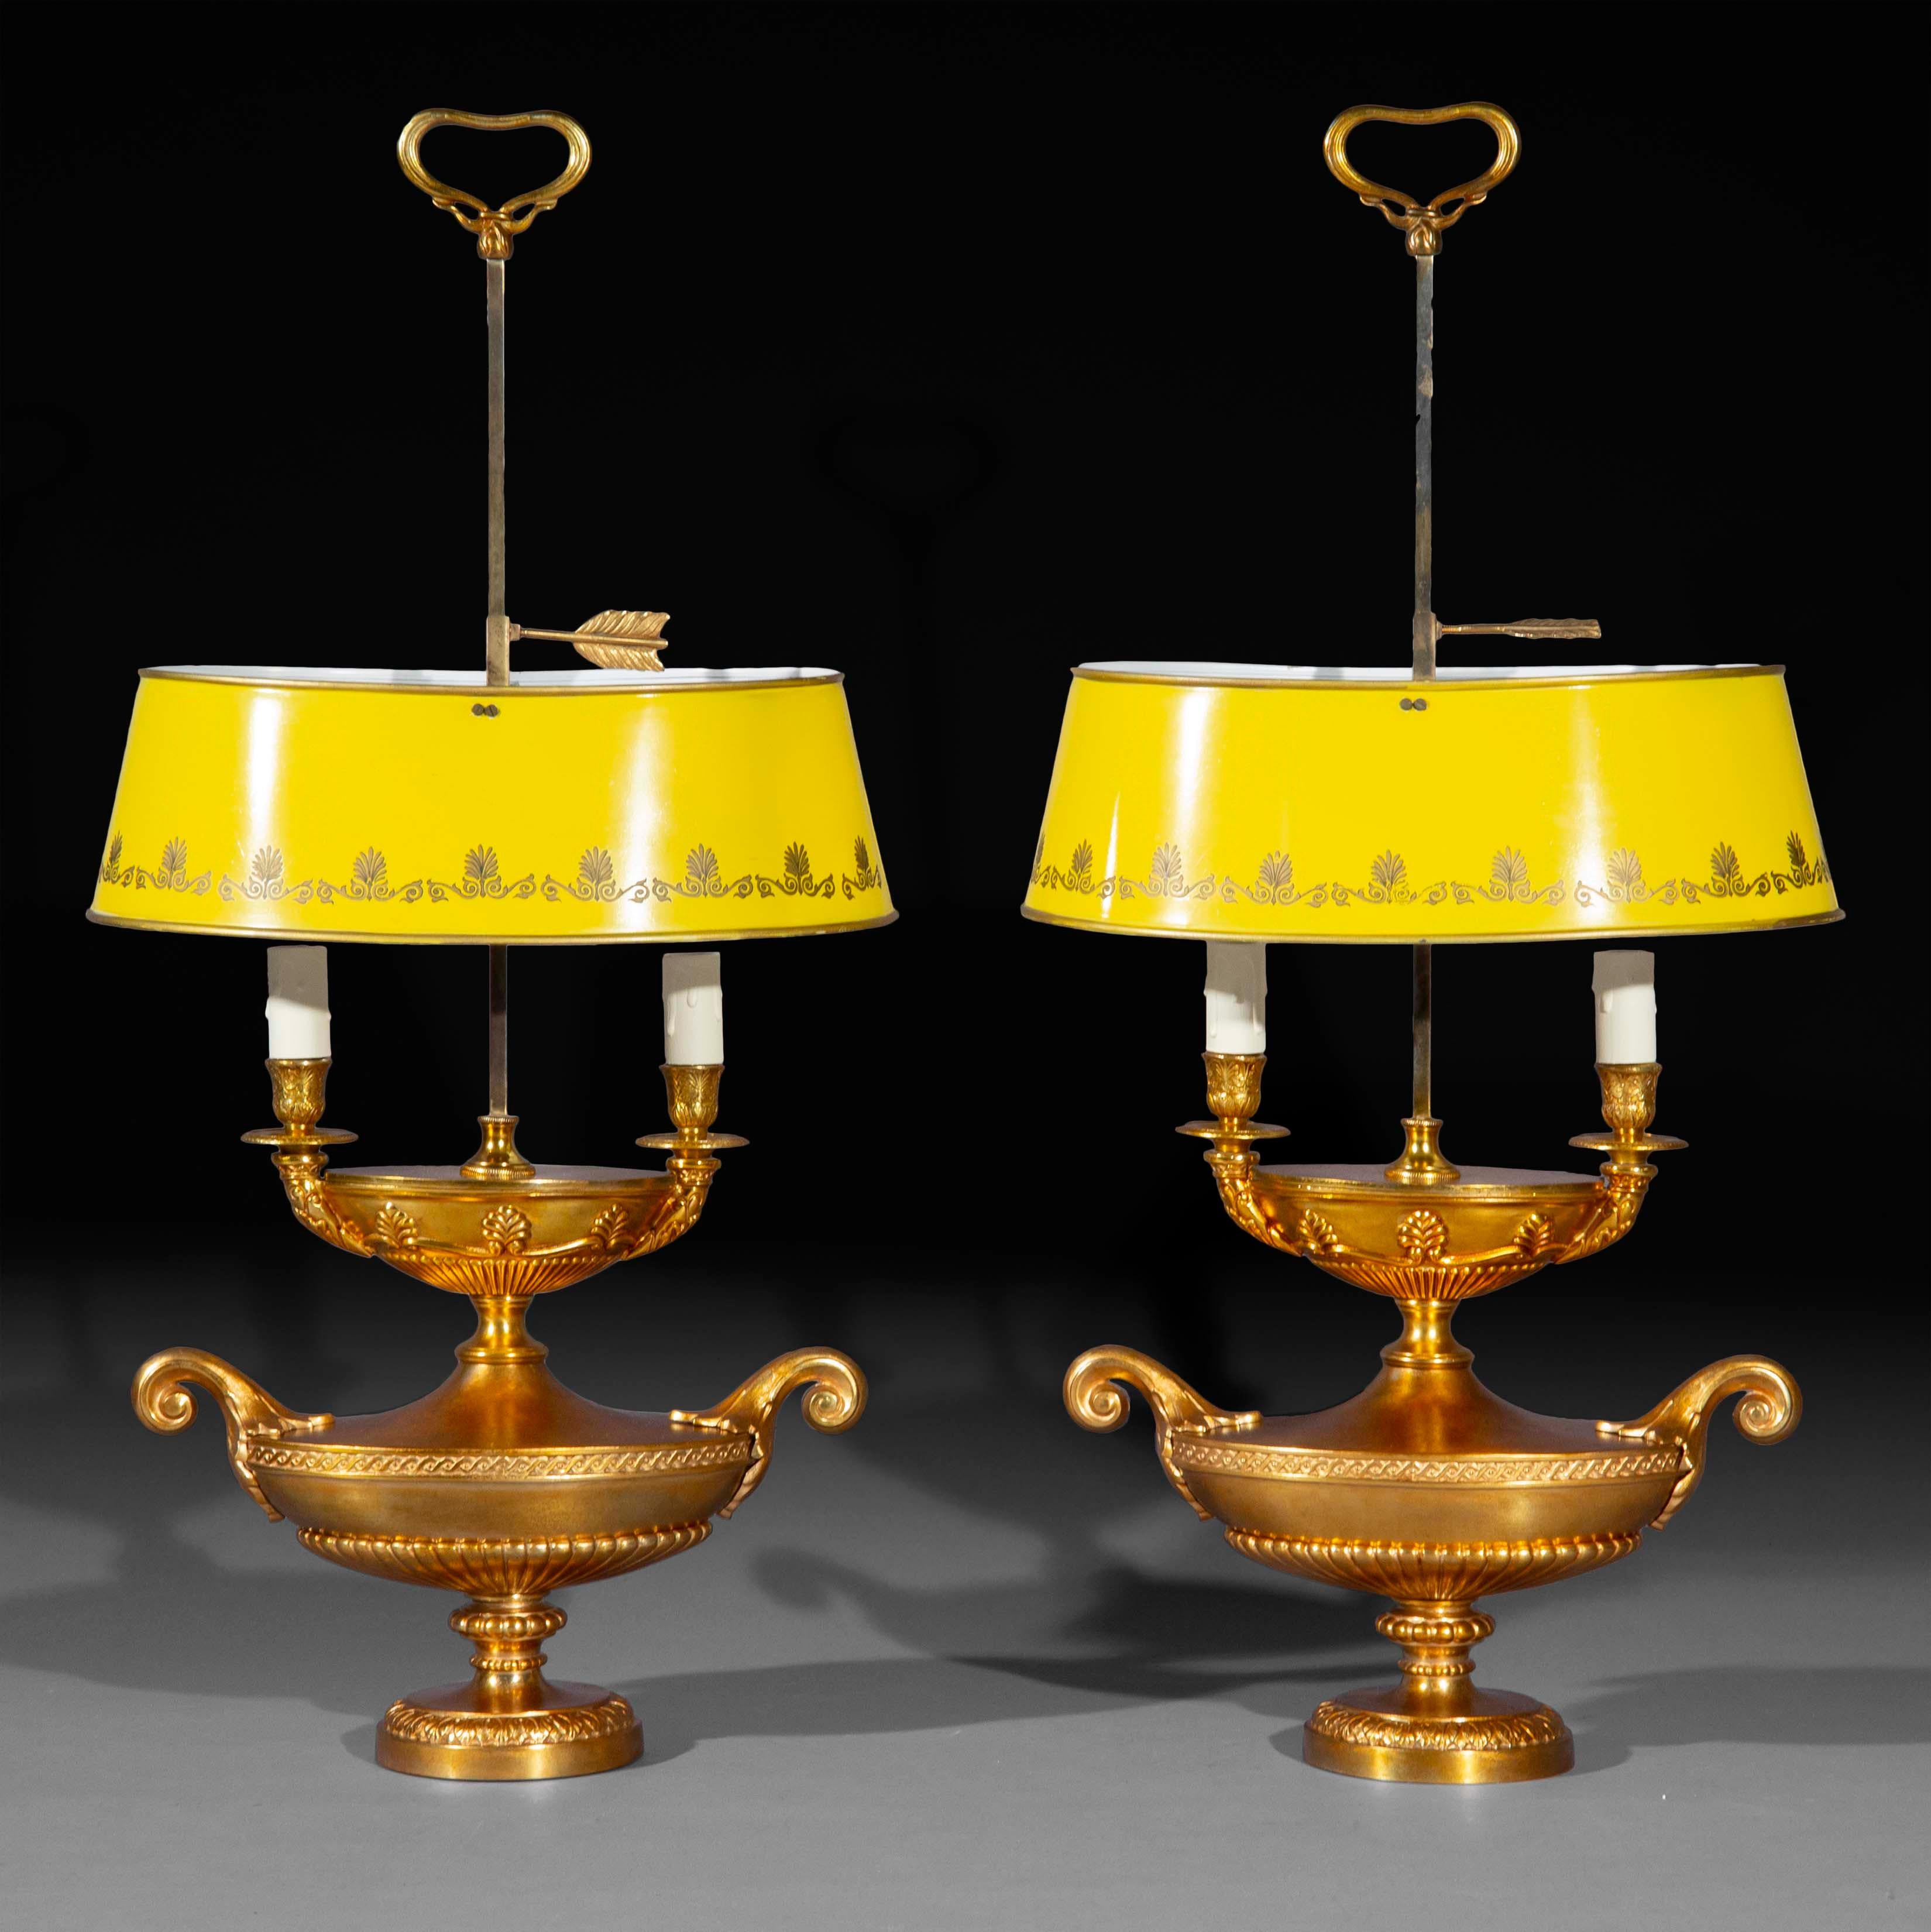 A pair of unusual and decorative lacquered brass 'bouillotte' table lamps, fashioned as Ancient Roman oil lamps, each for two lightbulbs and with adjustable yellow 'tôle peinte' shades
France or Italy, early to mid-20th century.

Why we like